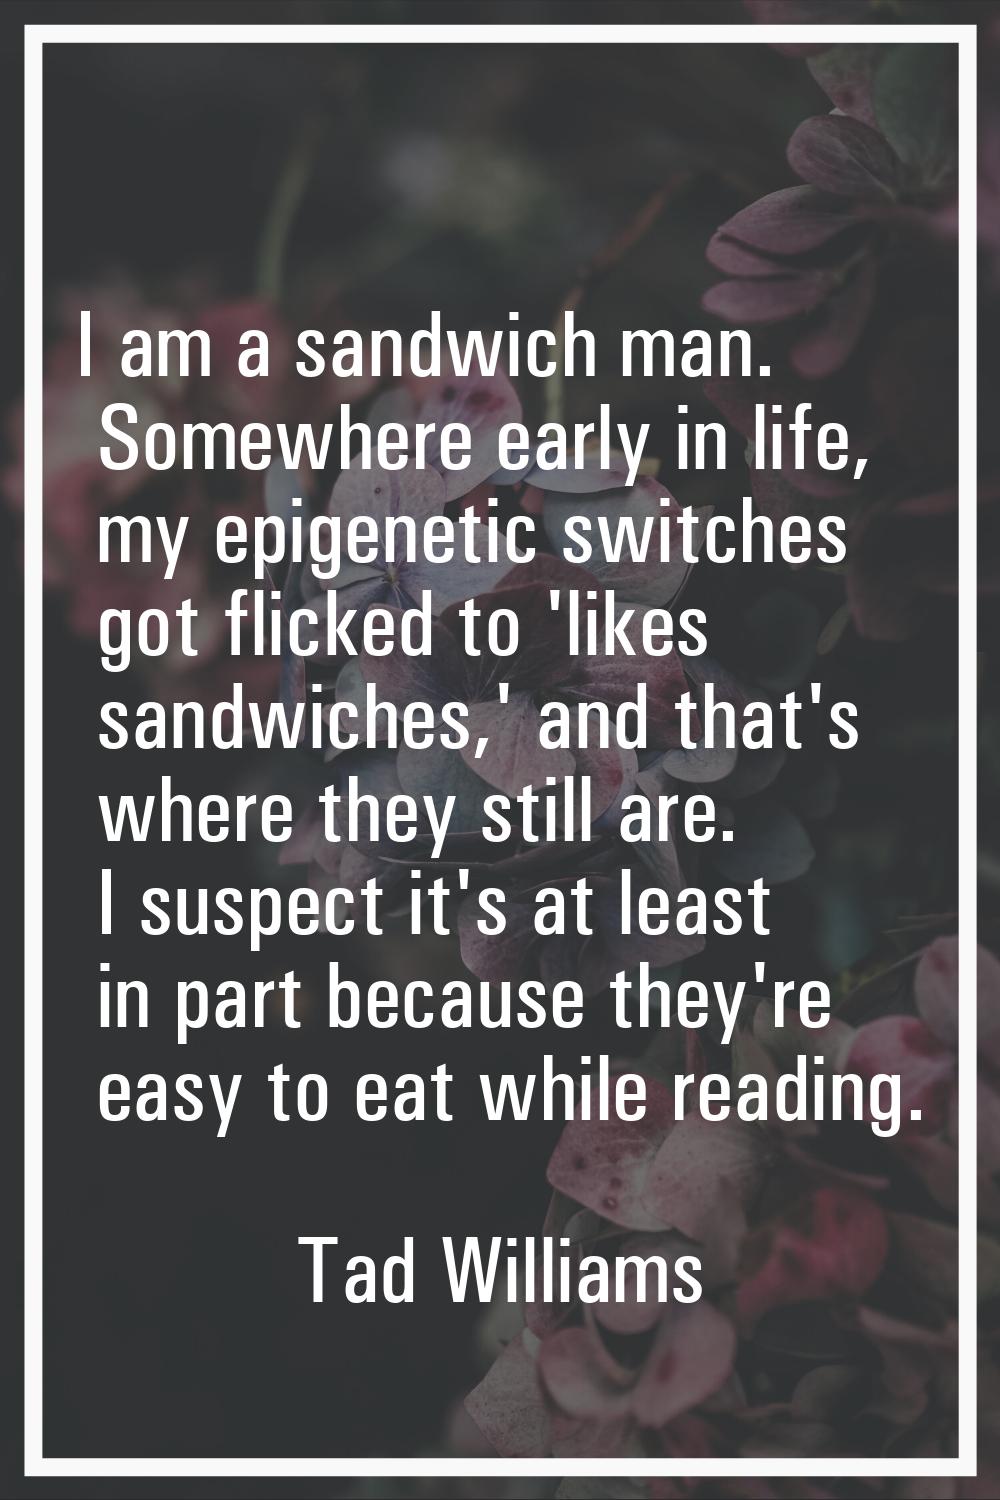 I am a sandwich man. Somewhere early in life, my epigenetic switches got flicked to 'likes sandwich